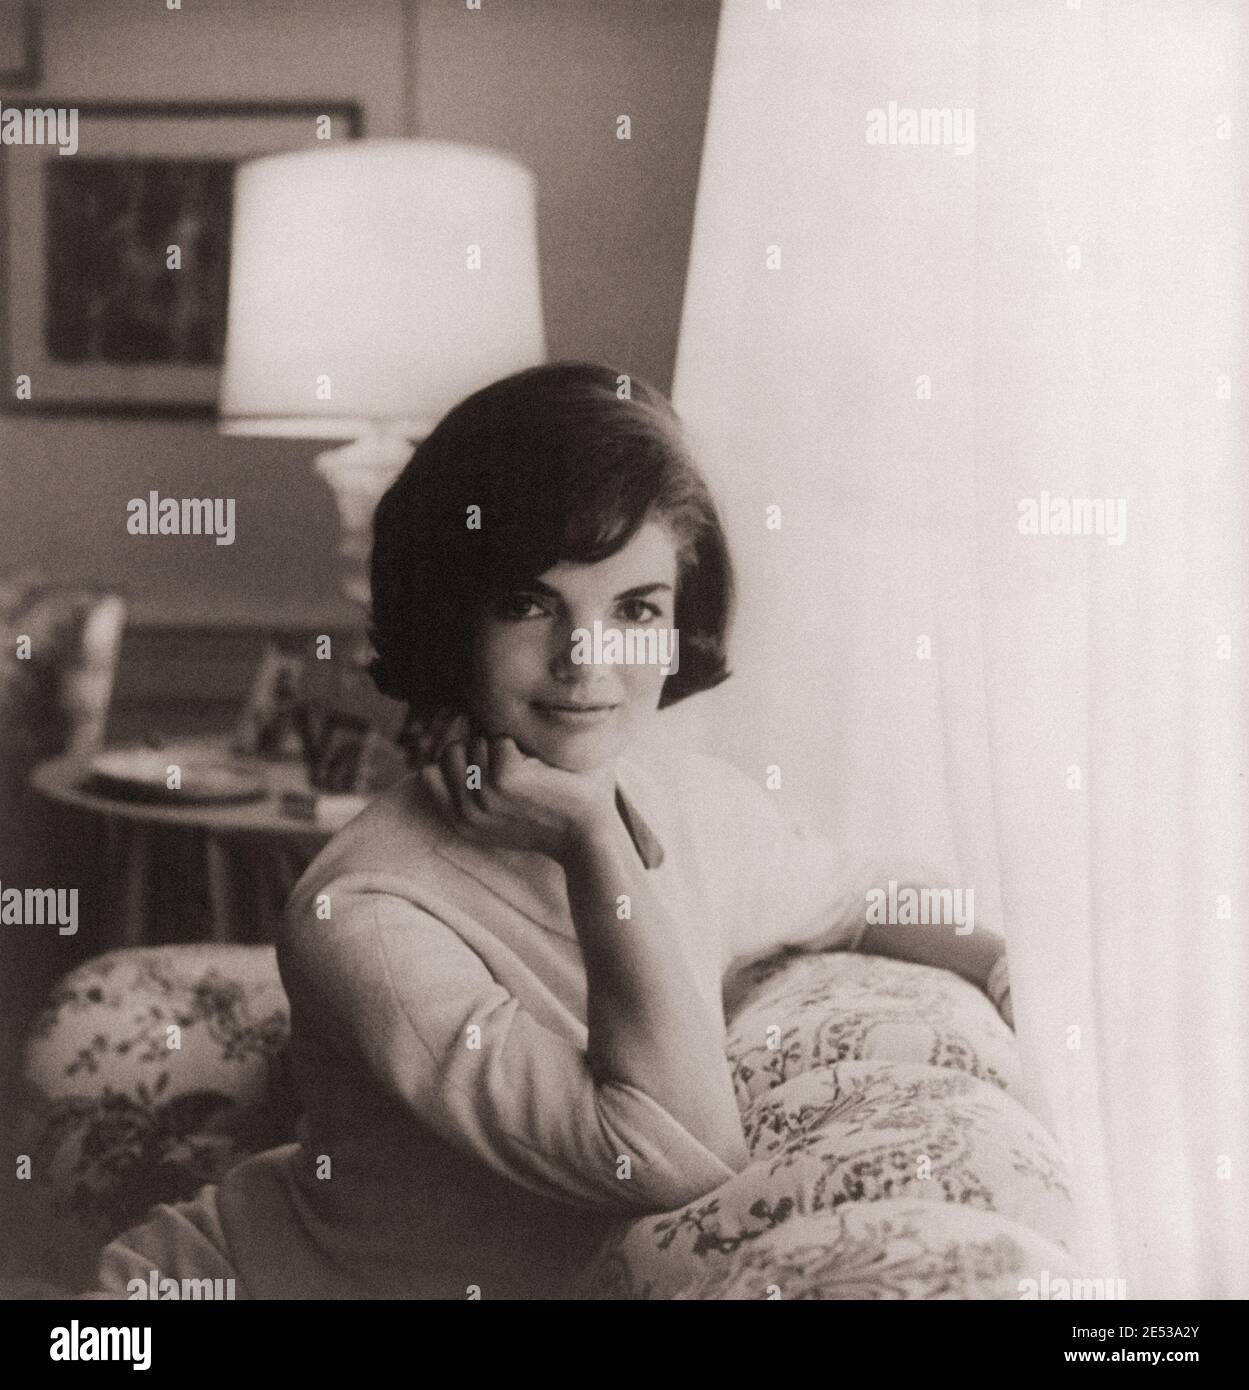 First official White House photograph of Jacqueline Kennedy, half-length  portrait, seated on couch, facing front. USA. 1961 Jacqueline Lee Kennedy  Ona Stock Photo - Alamy